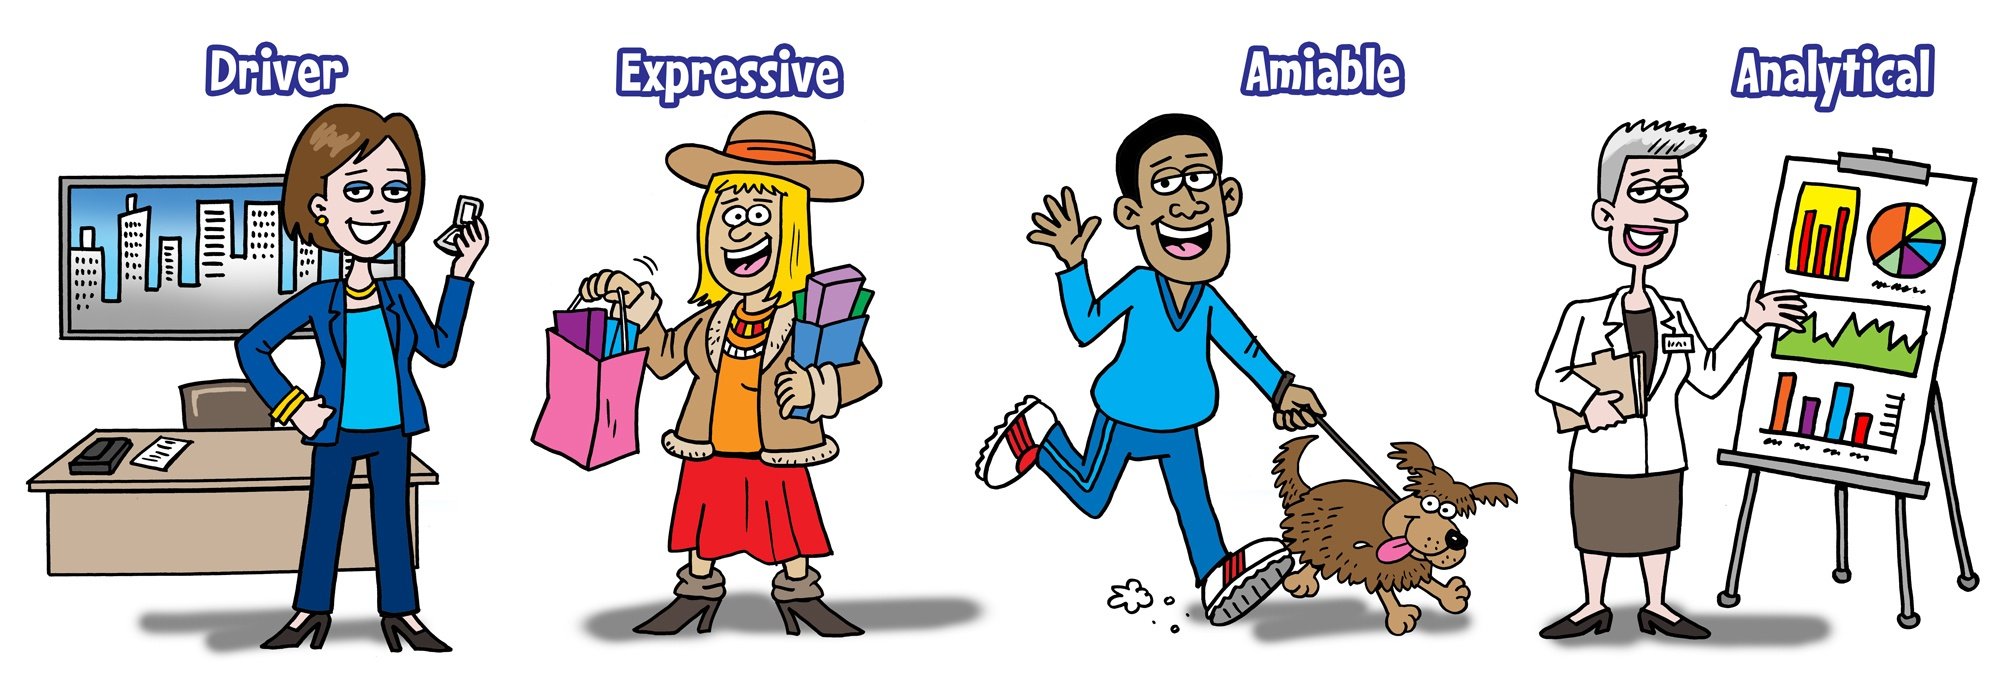 amiable personality type